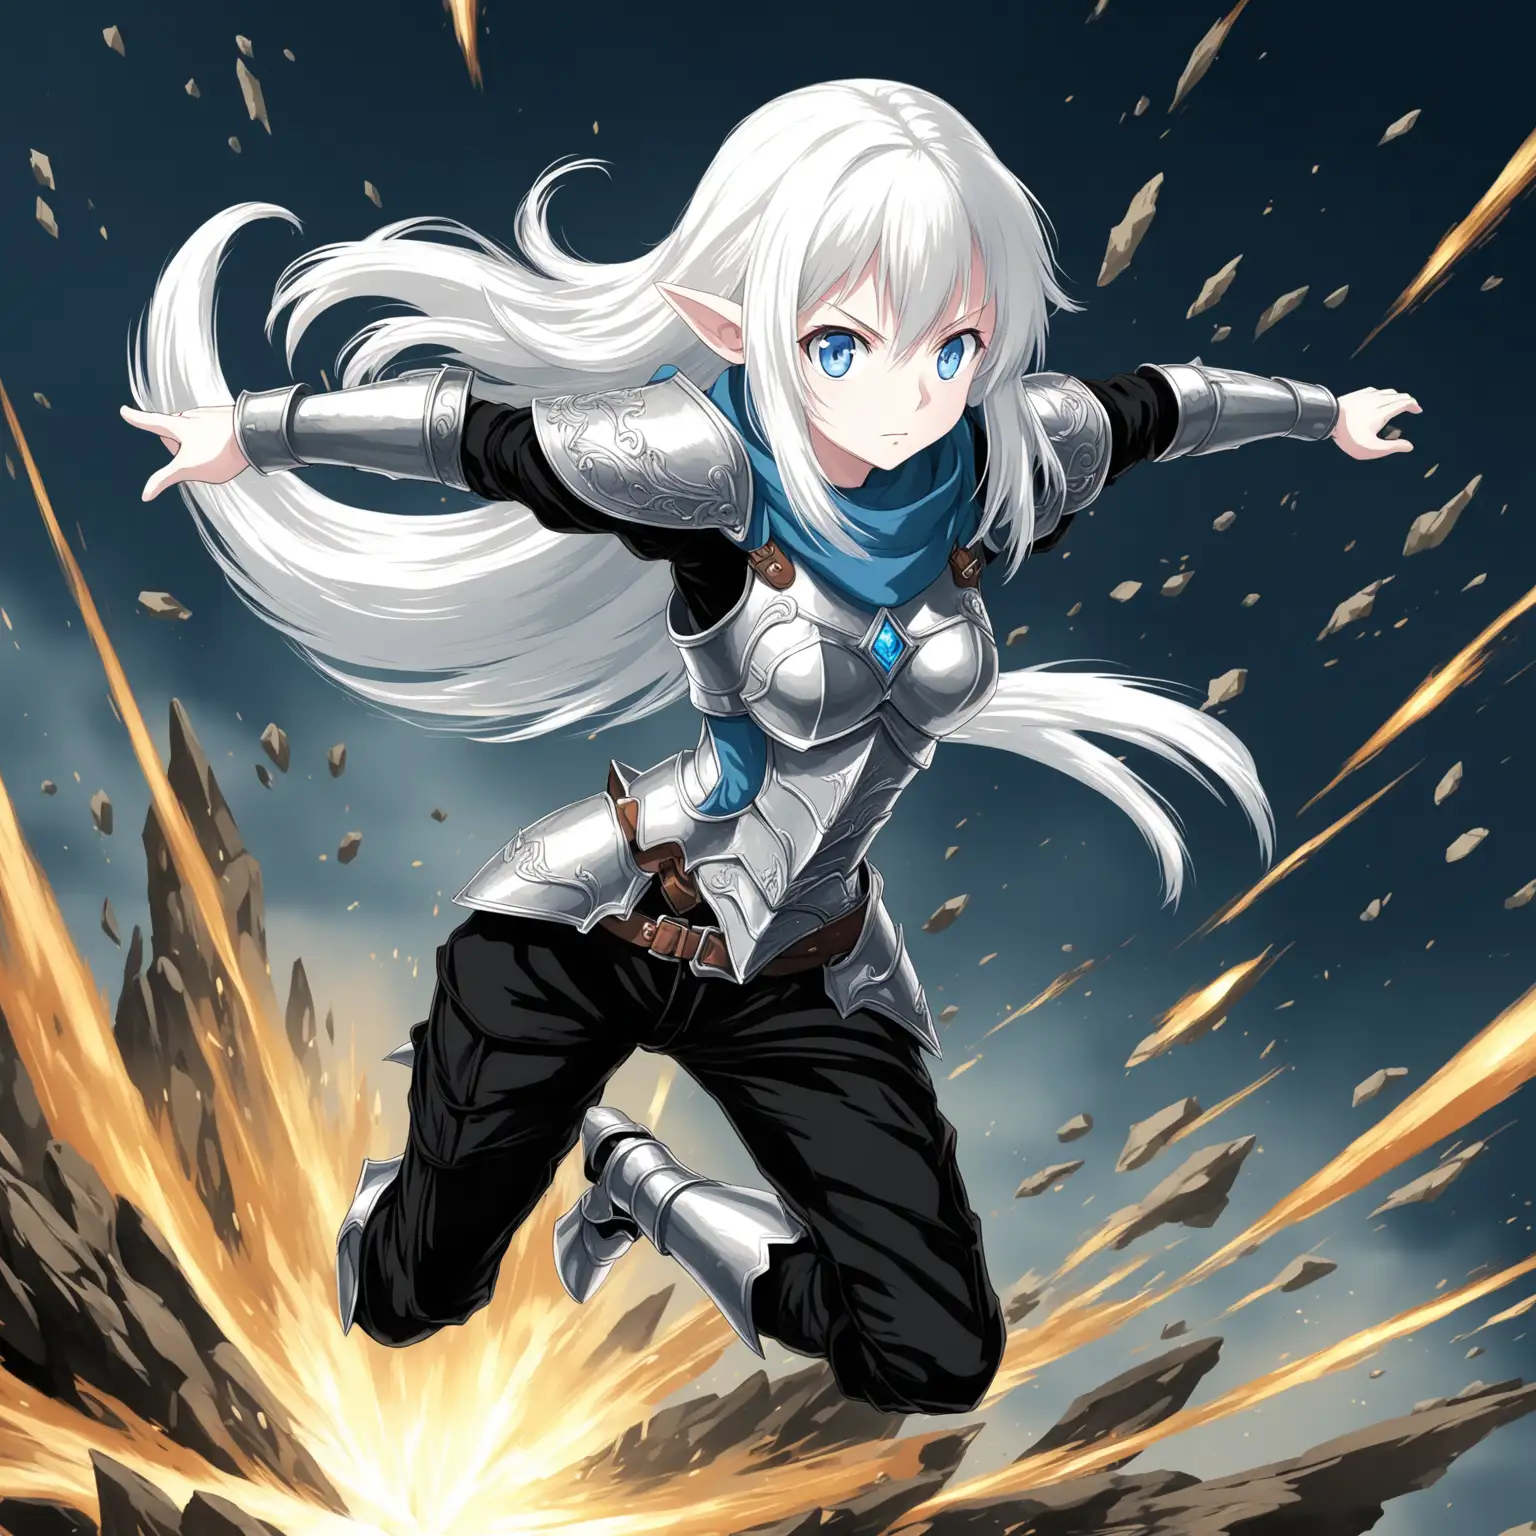 Adventurous Anime Girl with Long White Hair and Blue Eyes in Dynamic Pose